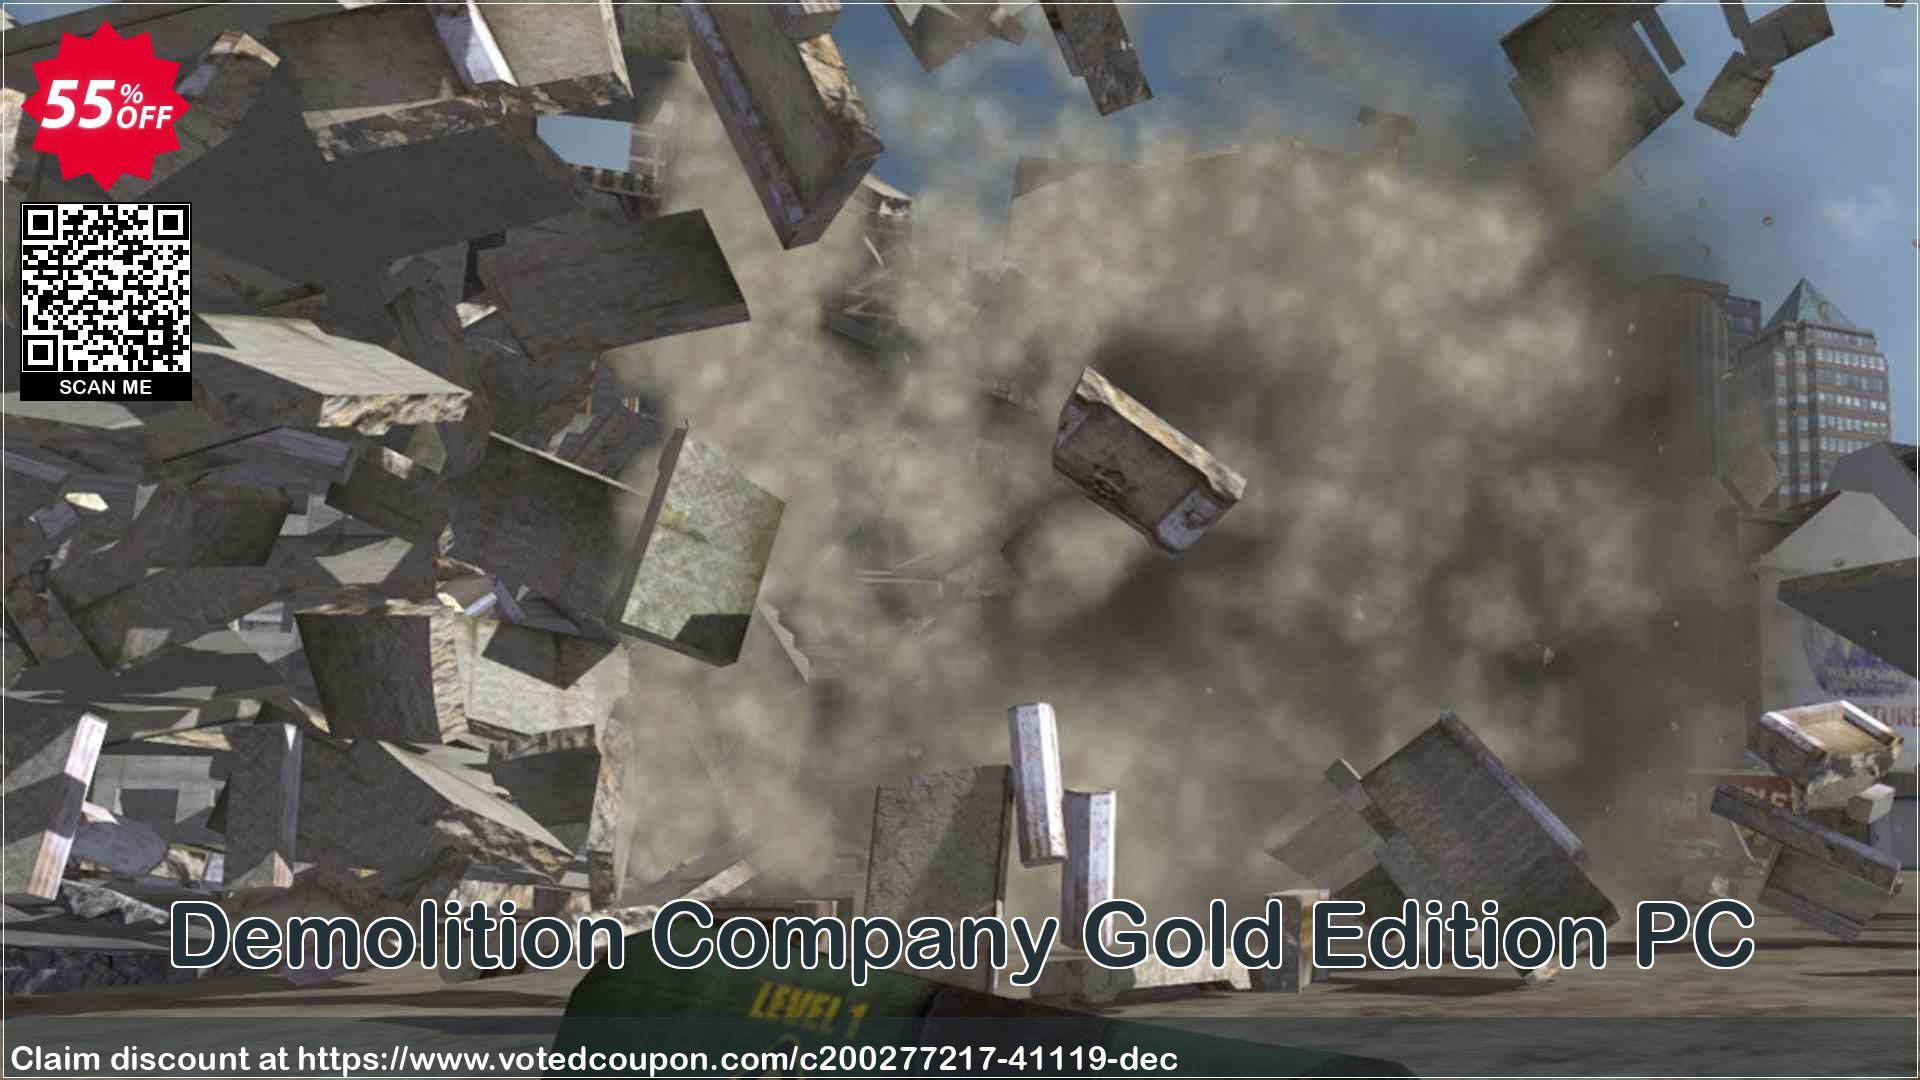 Demolition Company Gold Edition PC Coupon Code May 2024, 55% OFF - VotedCoupon